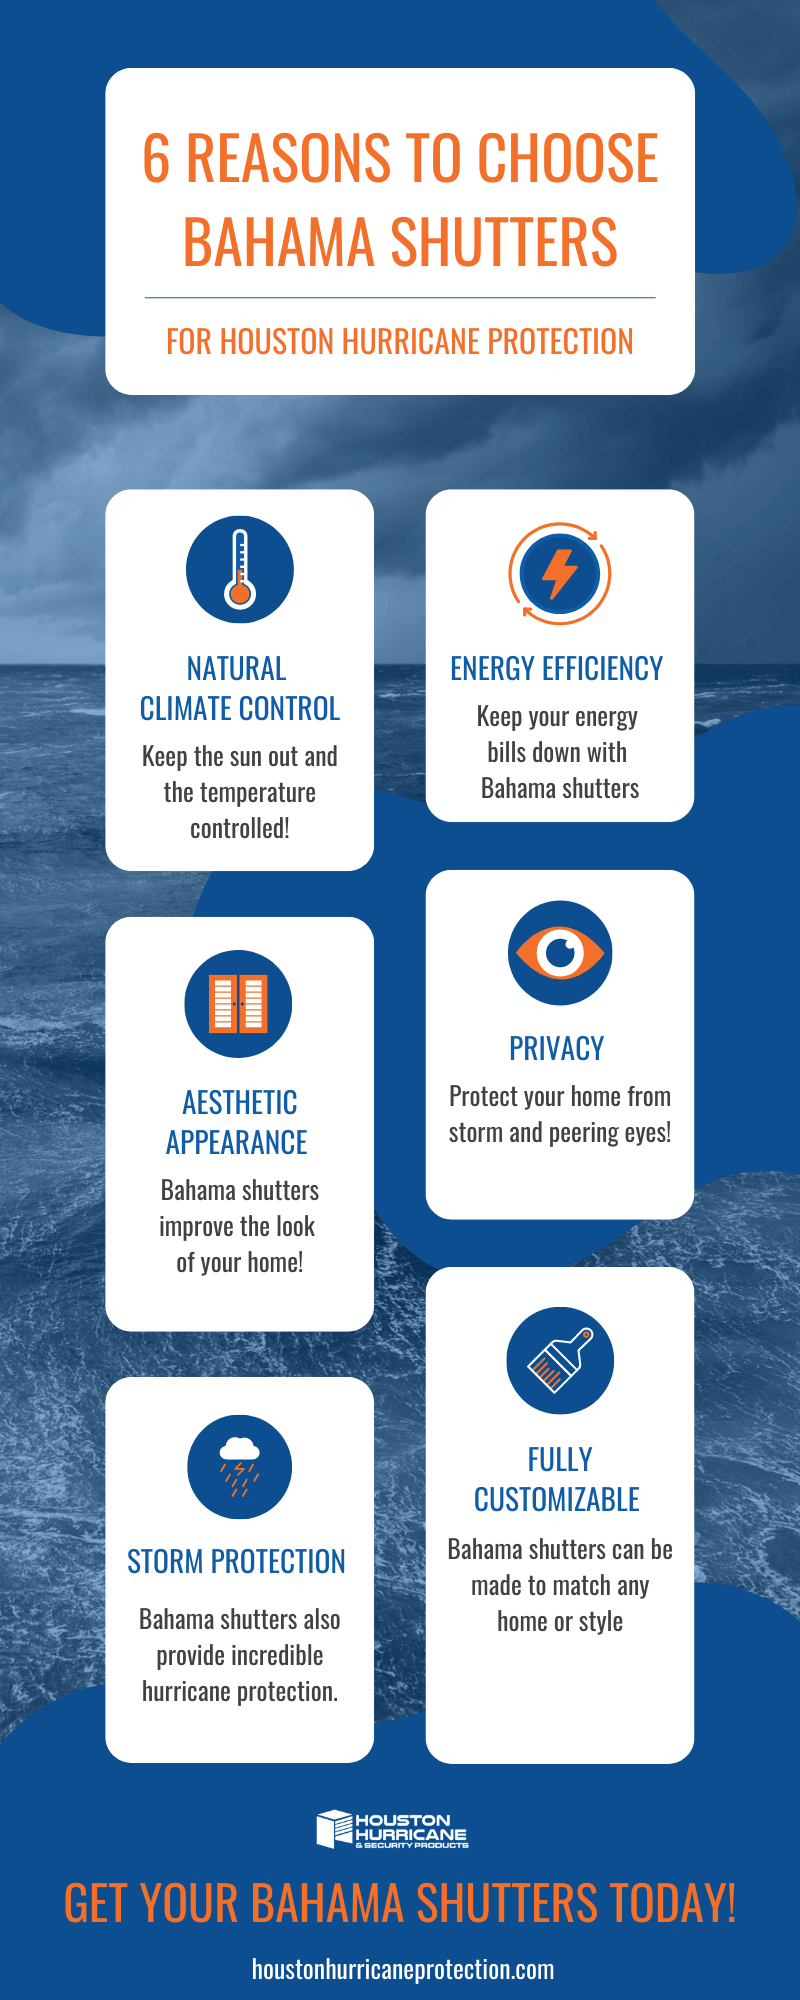 M31248 - Infographic - 6 Reasons To Choose Bahama Shutters Houston Hurricane Protection  (1).png